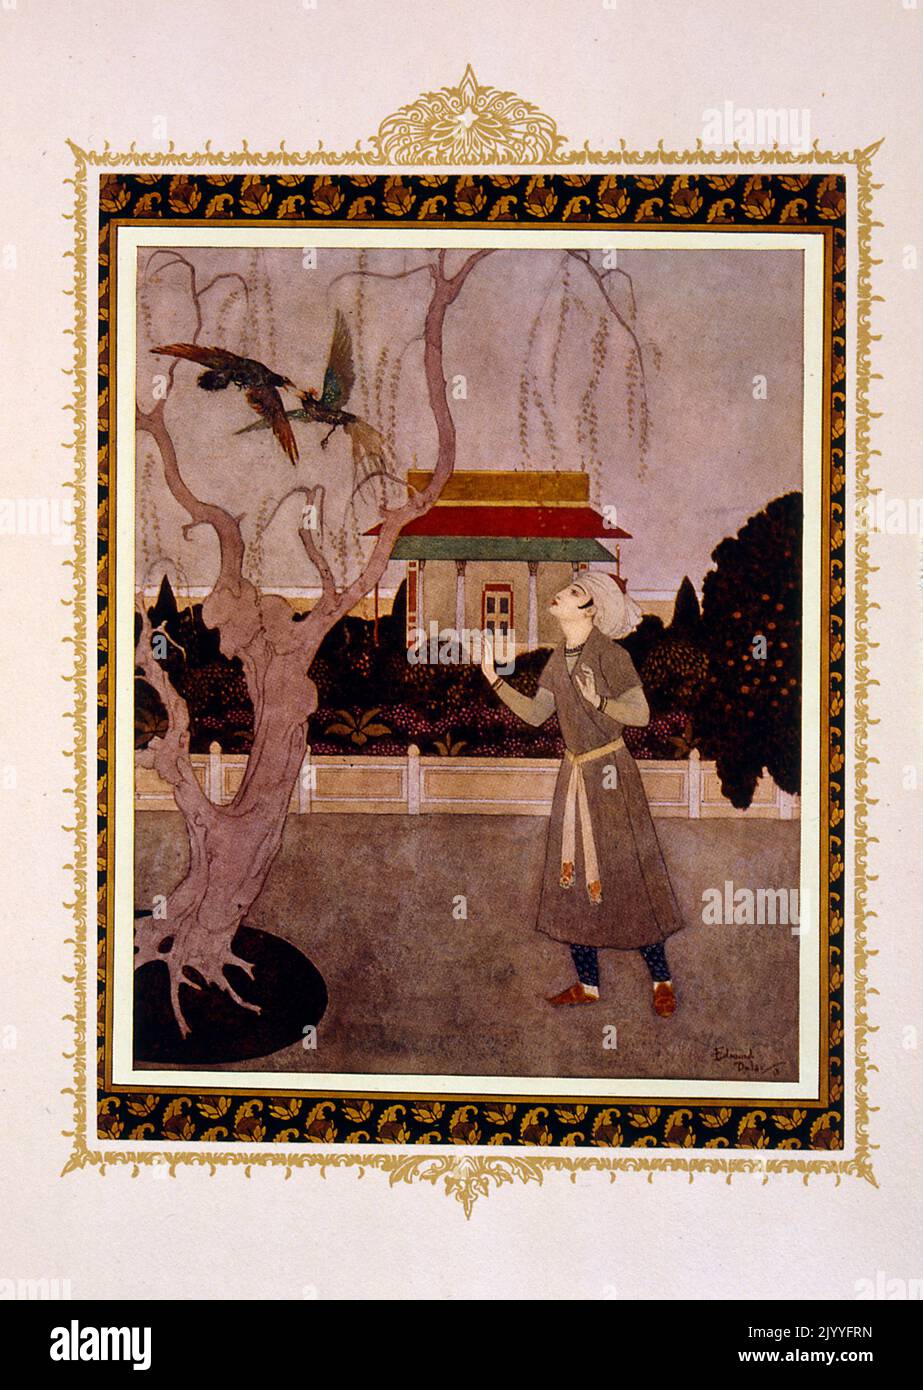 Illustration from 'Princess Badoura: A Tale from the Arabian Nights' depicting a man looking at exotic birds in a tree. Illustrated by Edmund Dulac (1882-1953), a French British naturalised magazine and book illustrator. Stock Photo